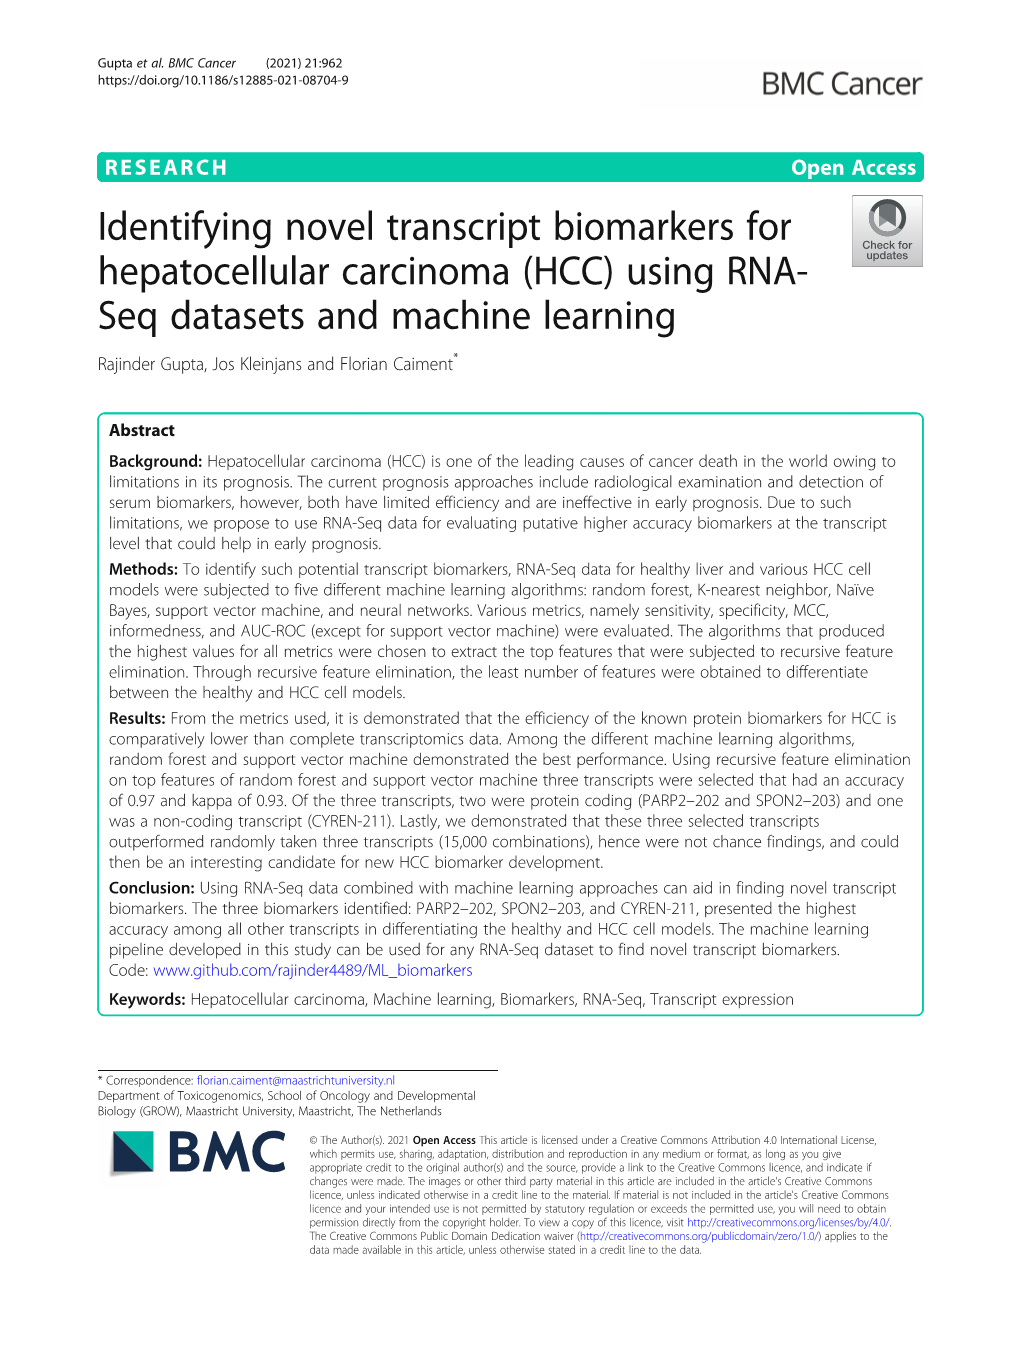 (HCC) Using RNA-Seq Datasets and Machine Learning